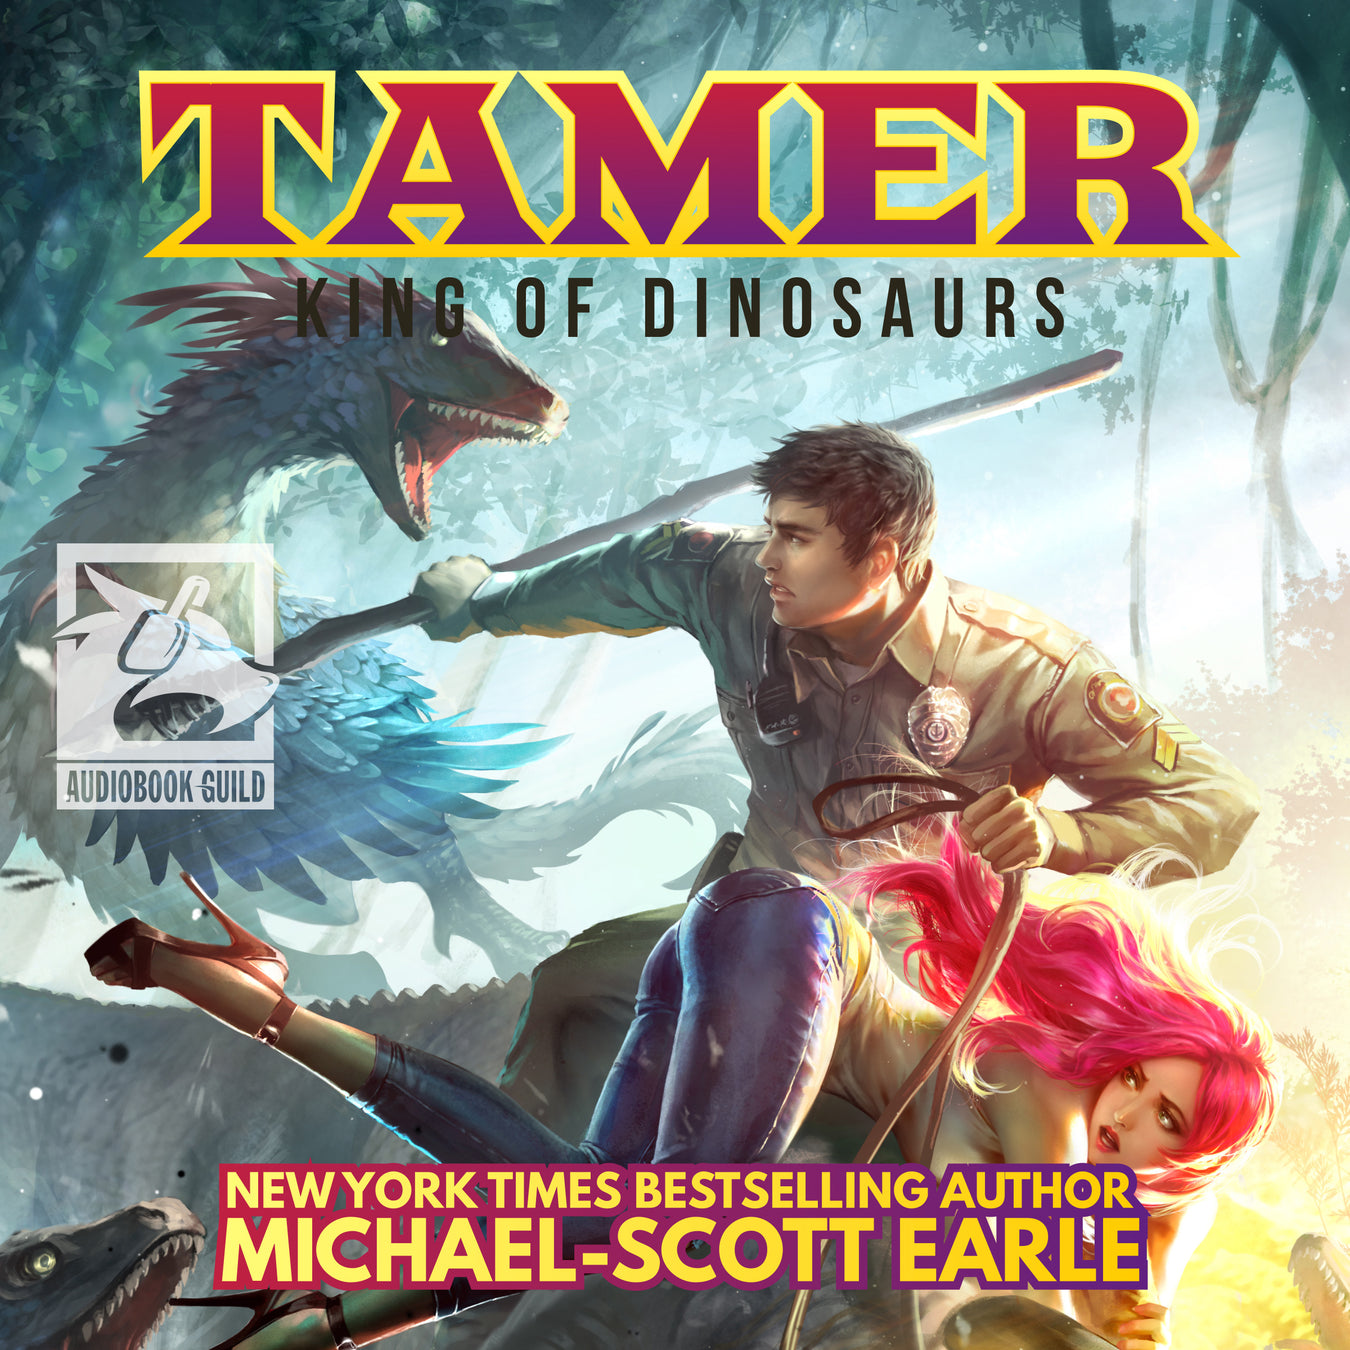 Tamer: King of Dinosaurs by Michael-Scott Earle